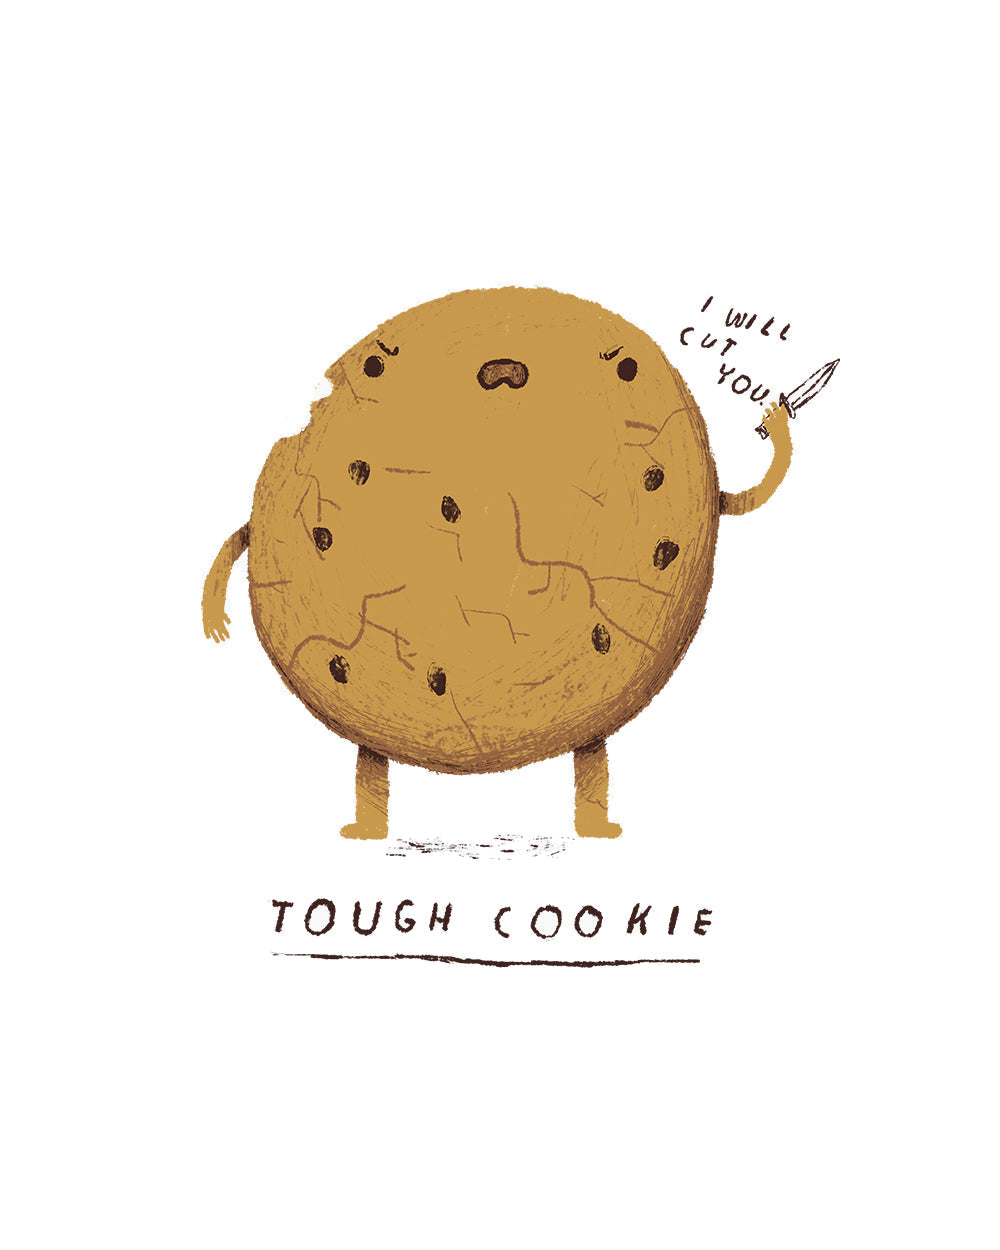 Tough Cookie Funny Biscuit Sweet Tooth Chocolate Food Foodie Parody Humorous Cotton T-Shirt